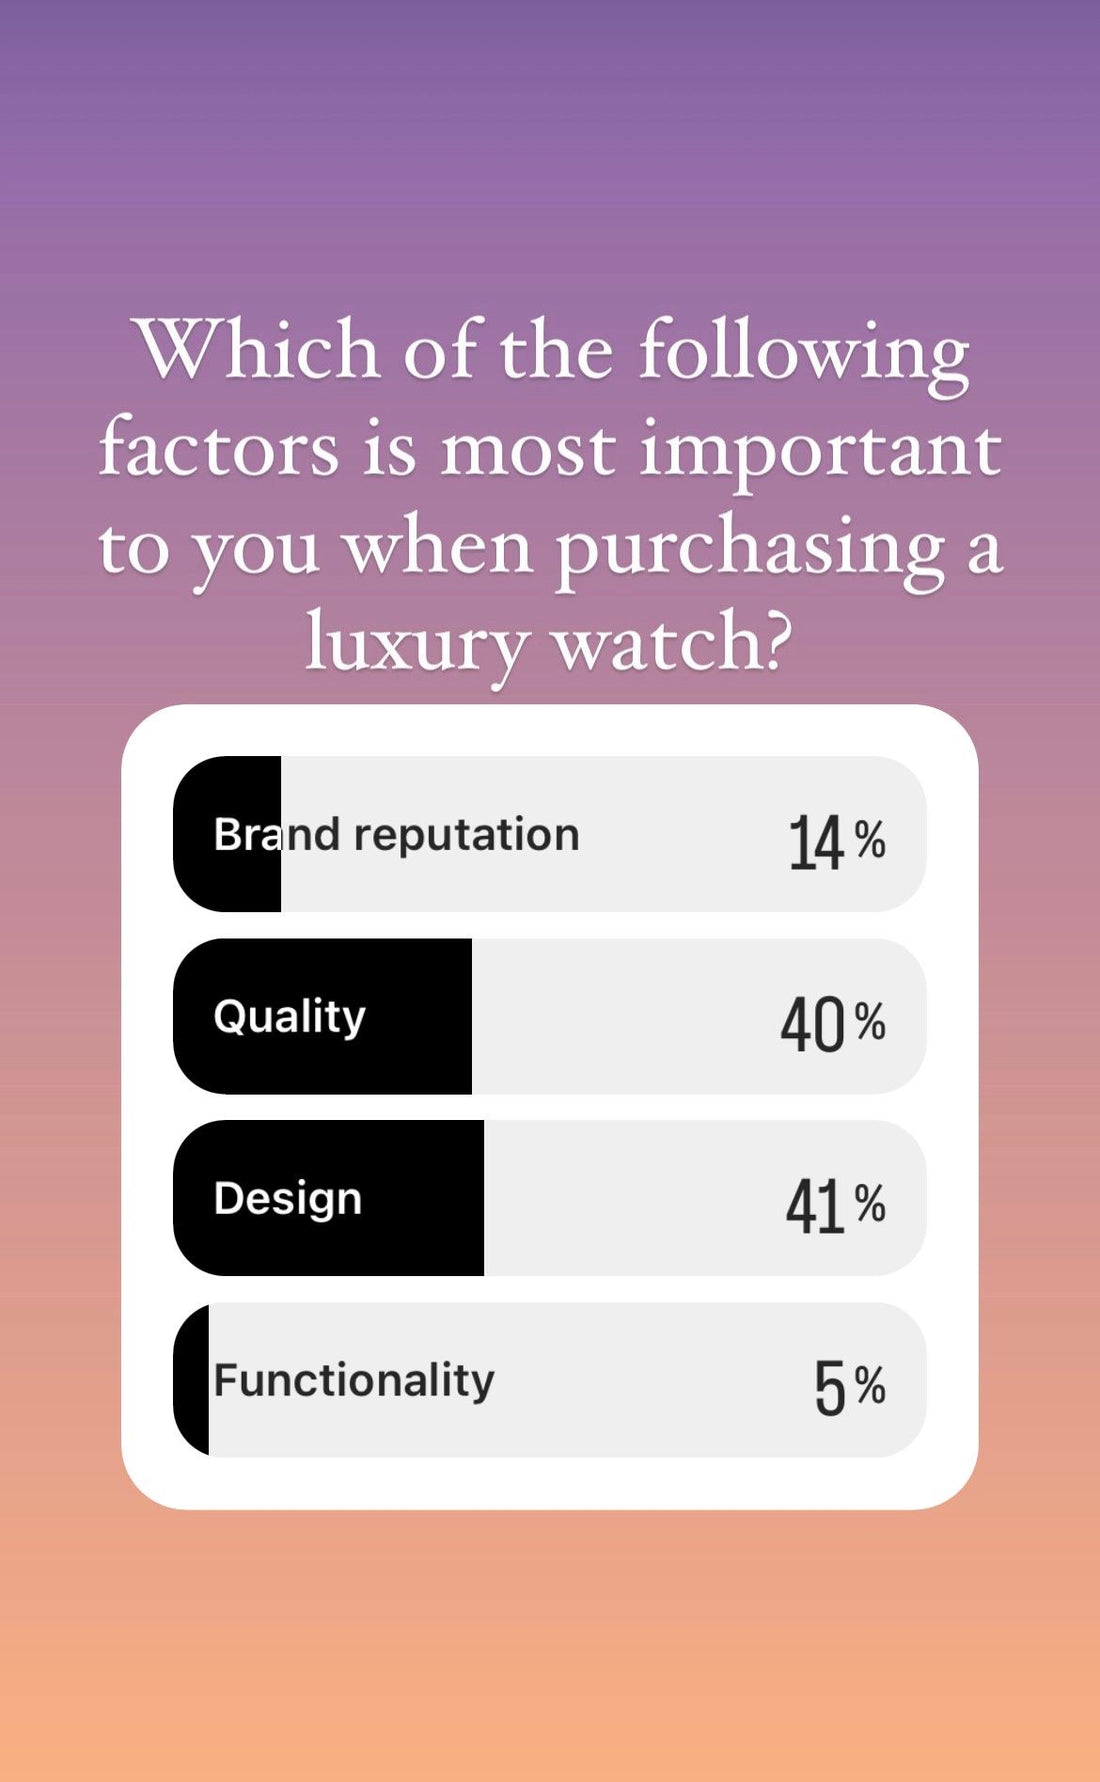 Quality and Design Trump Brand Reputation: What Key Opinion Leaders on Instagram Really Look for When Buying a Luxury Watch